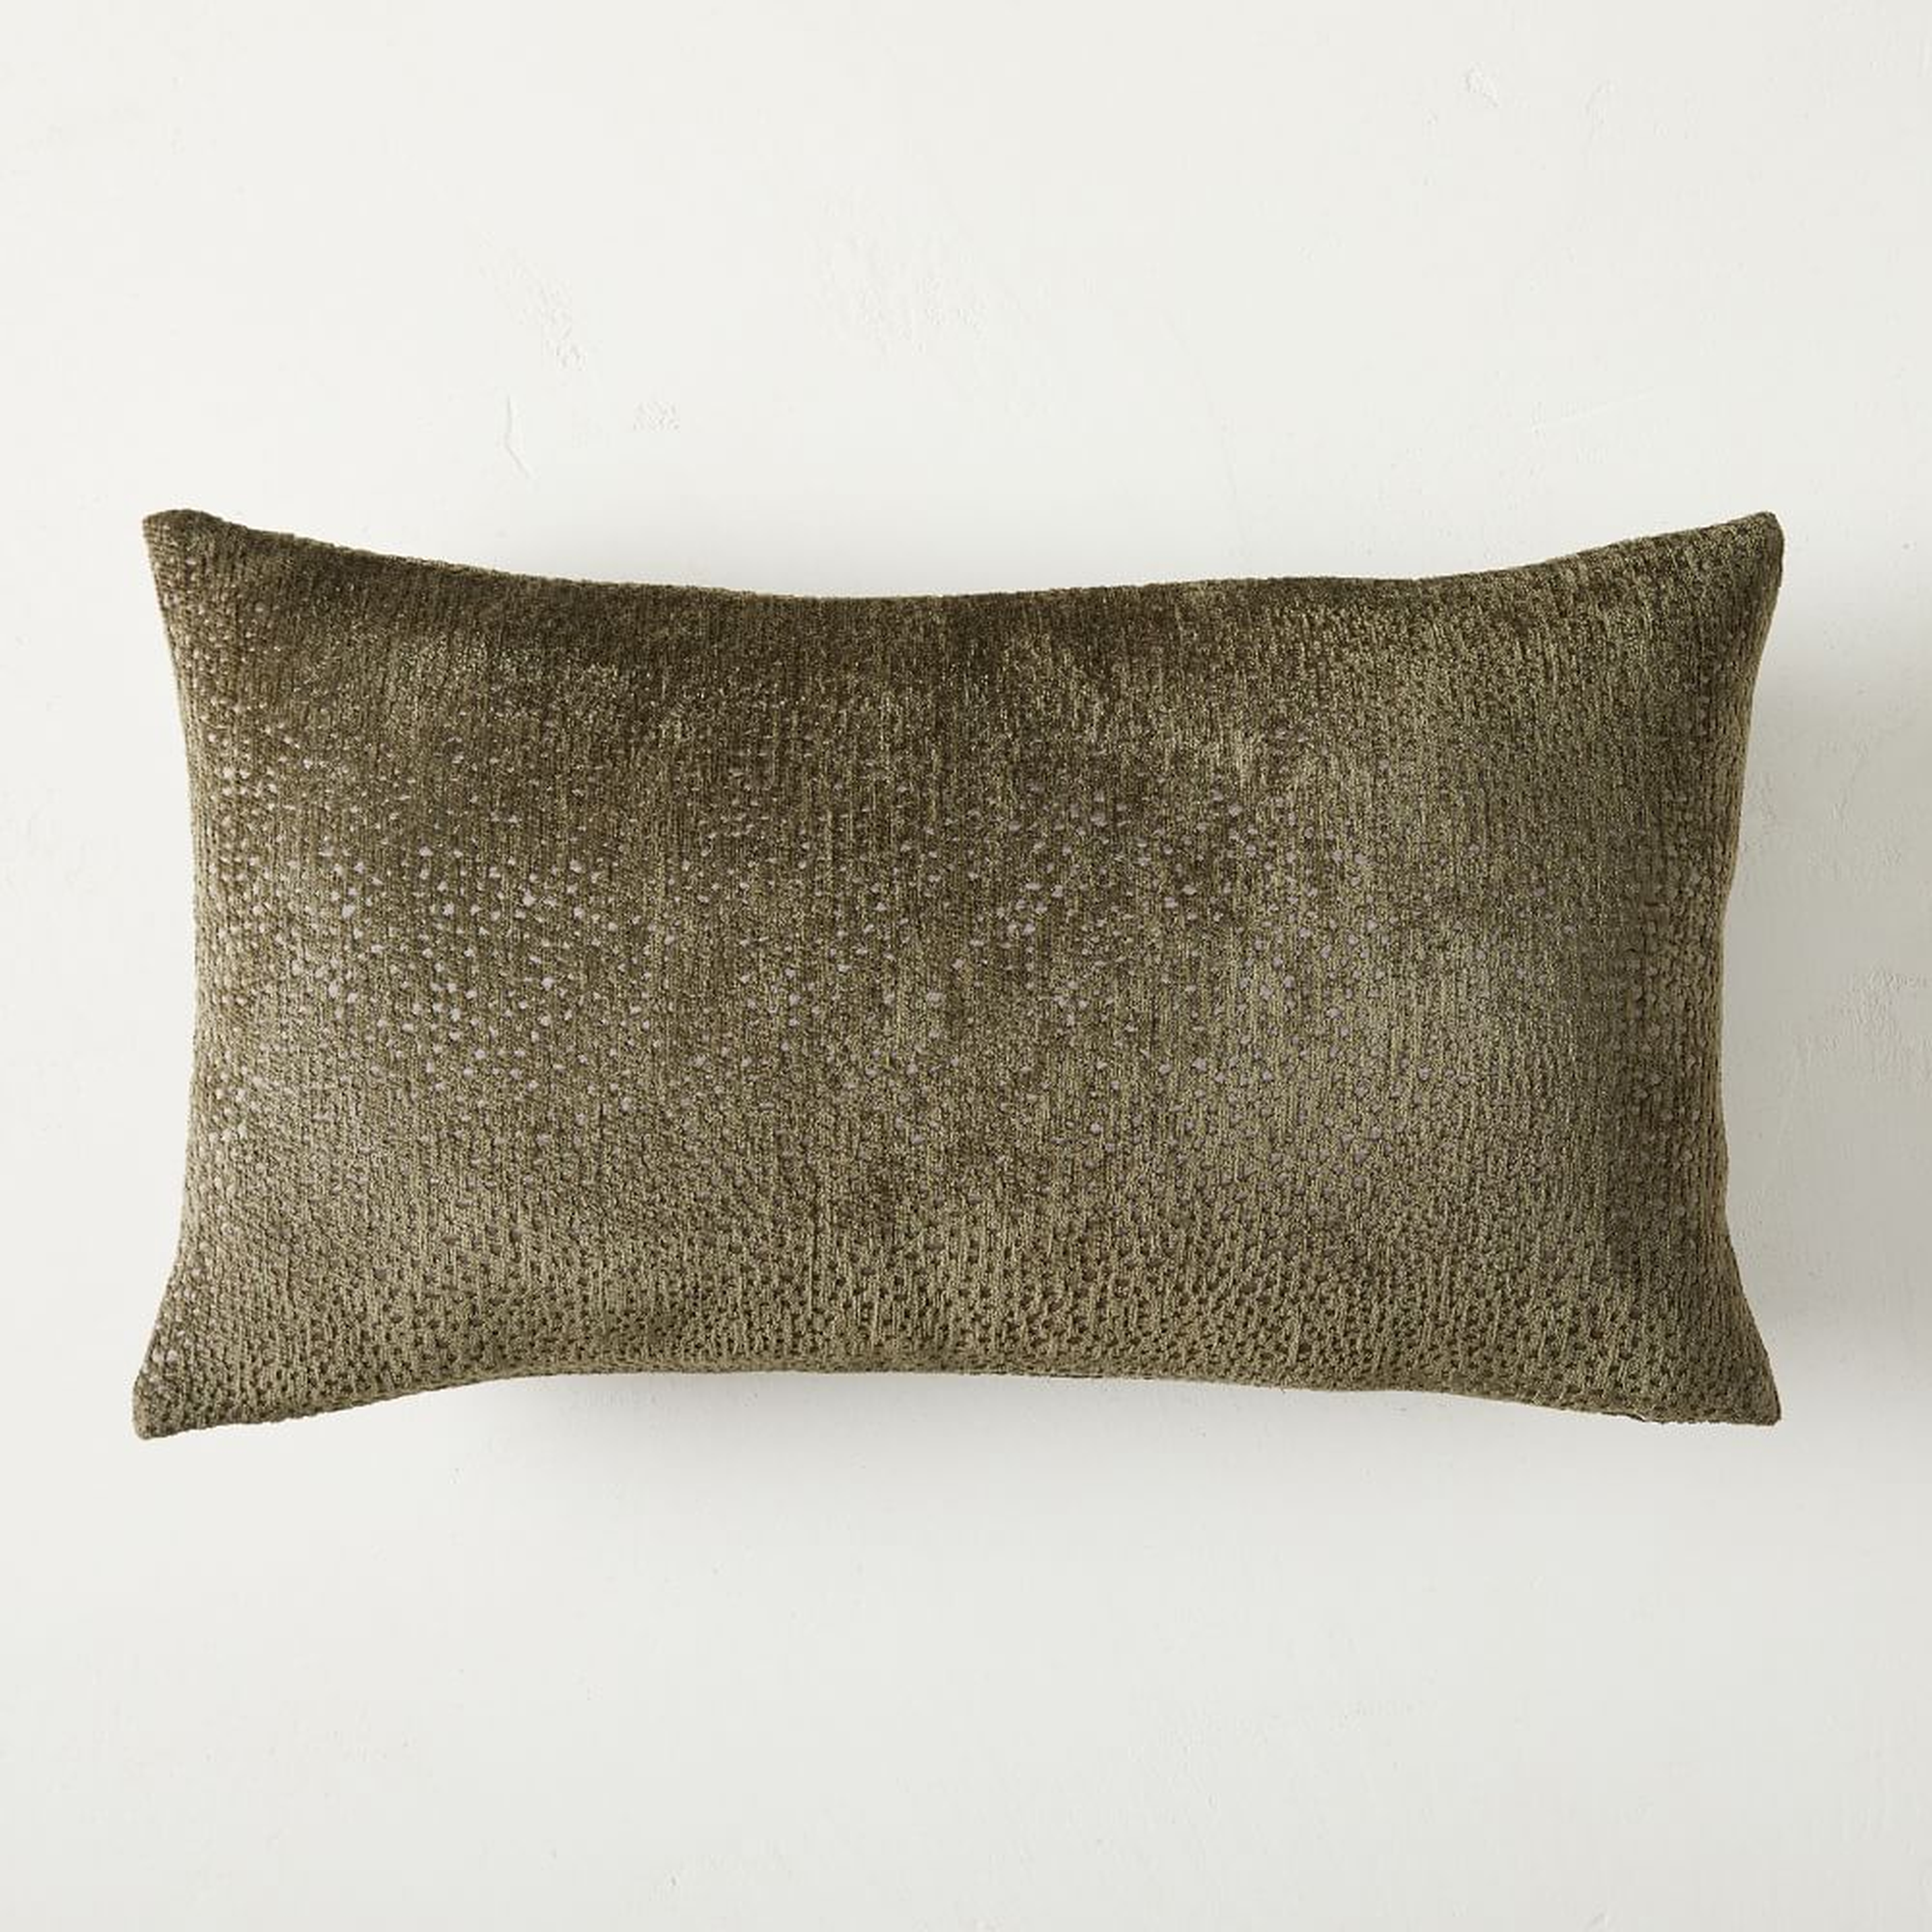 Dotted Chenille Jacquard Pillow Cover, 12"x21", Dark Olive - West Elm